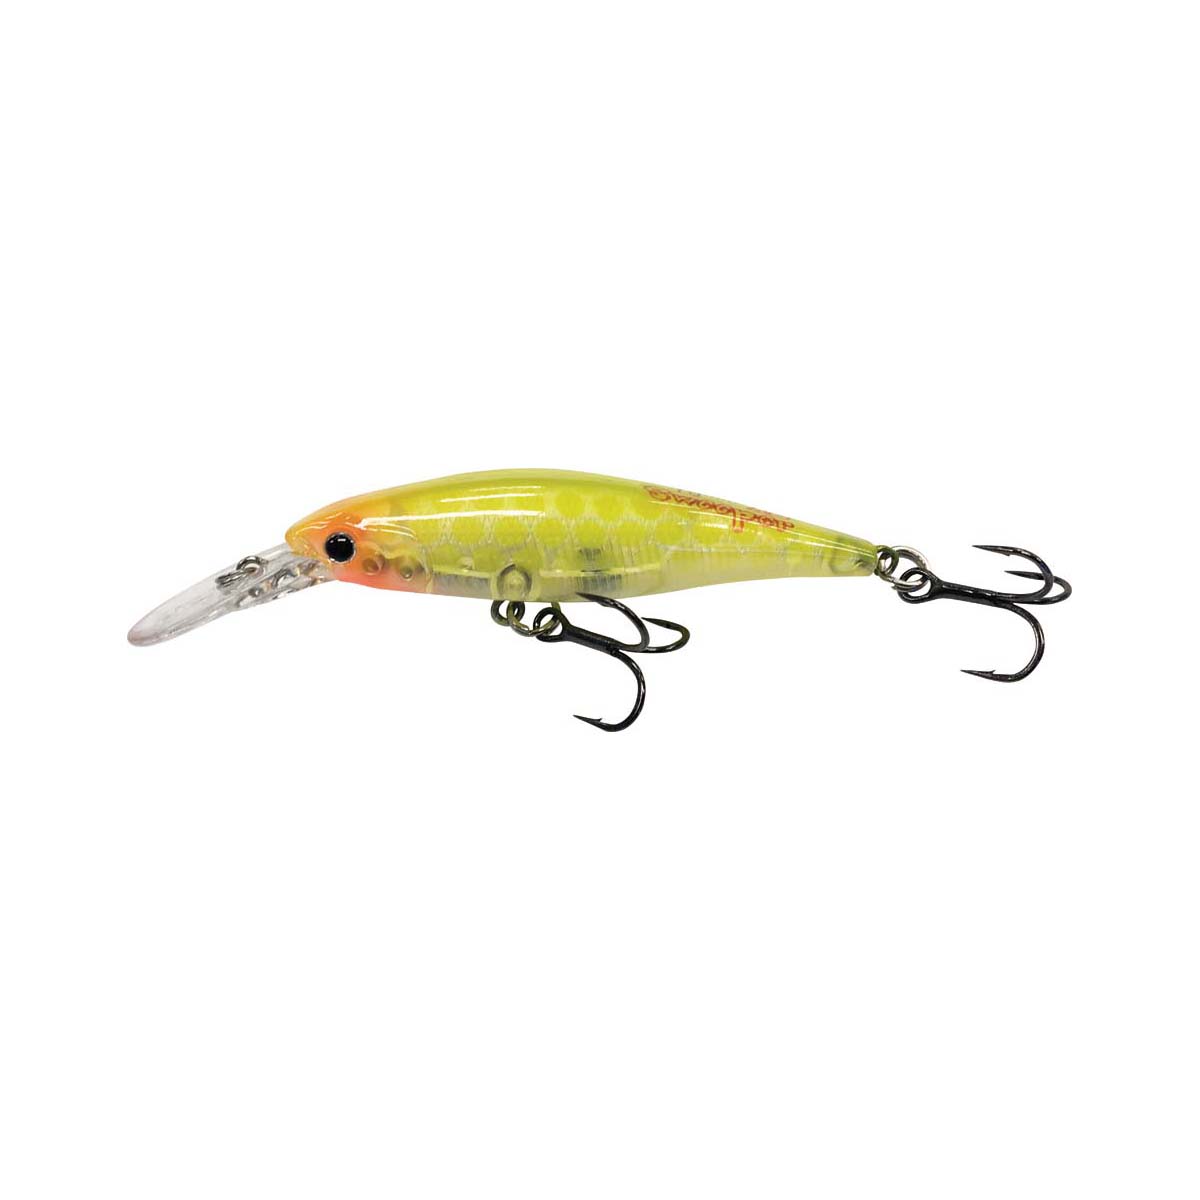 Asari Sweeper Hard Body Lures 7cm XD Hot Chartreuse